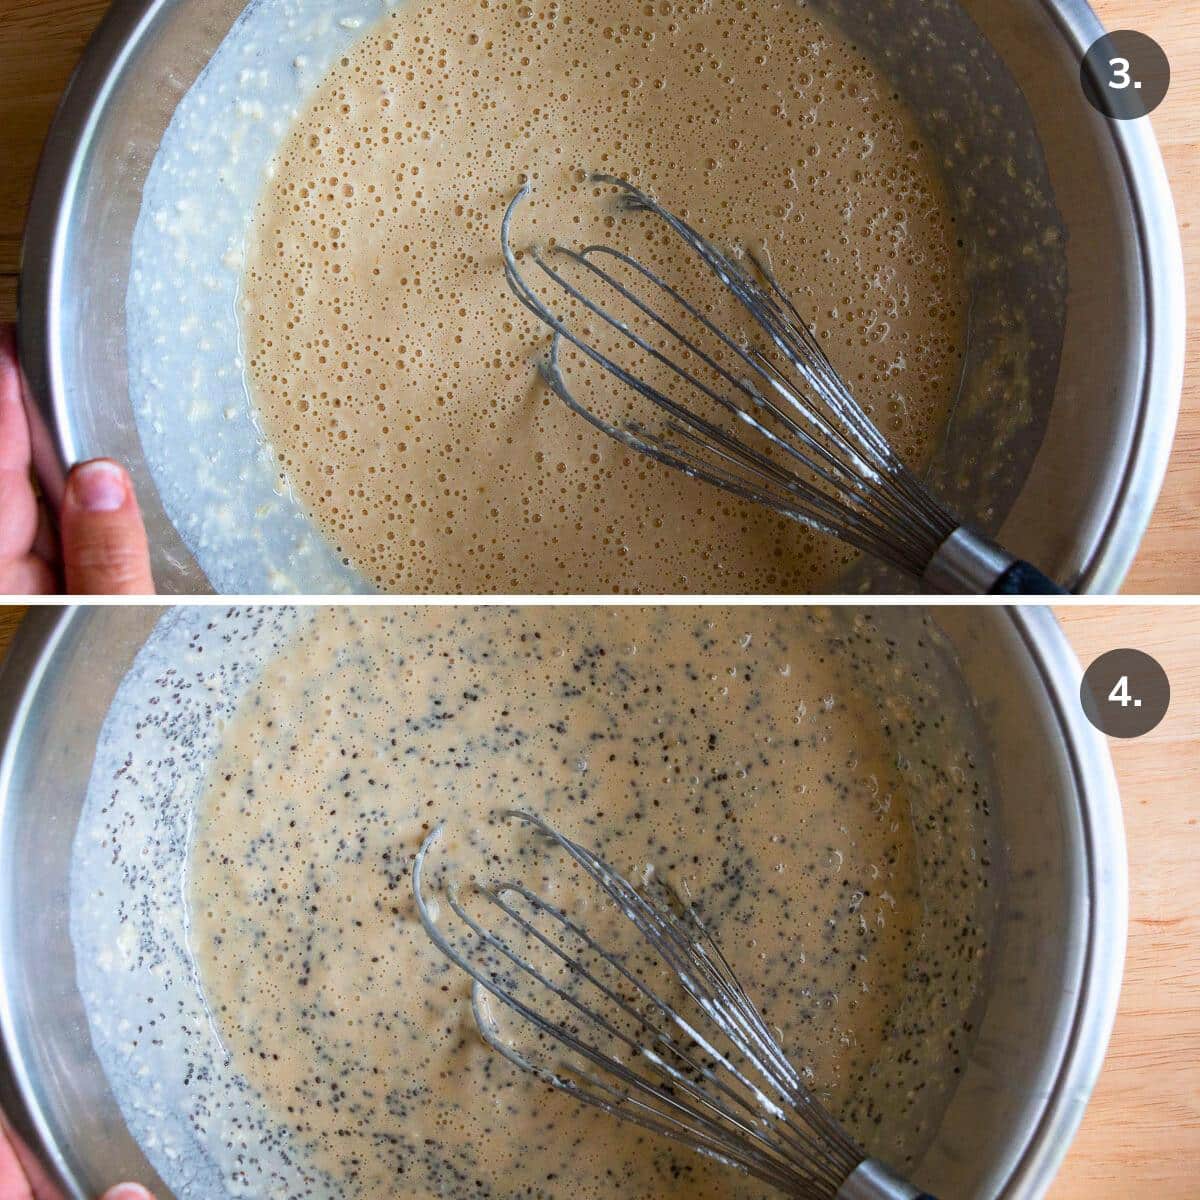 Adding in the almond milk and chia seeds into the pancake batter.